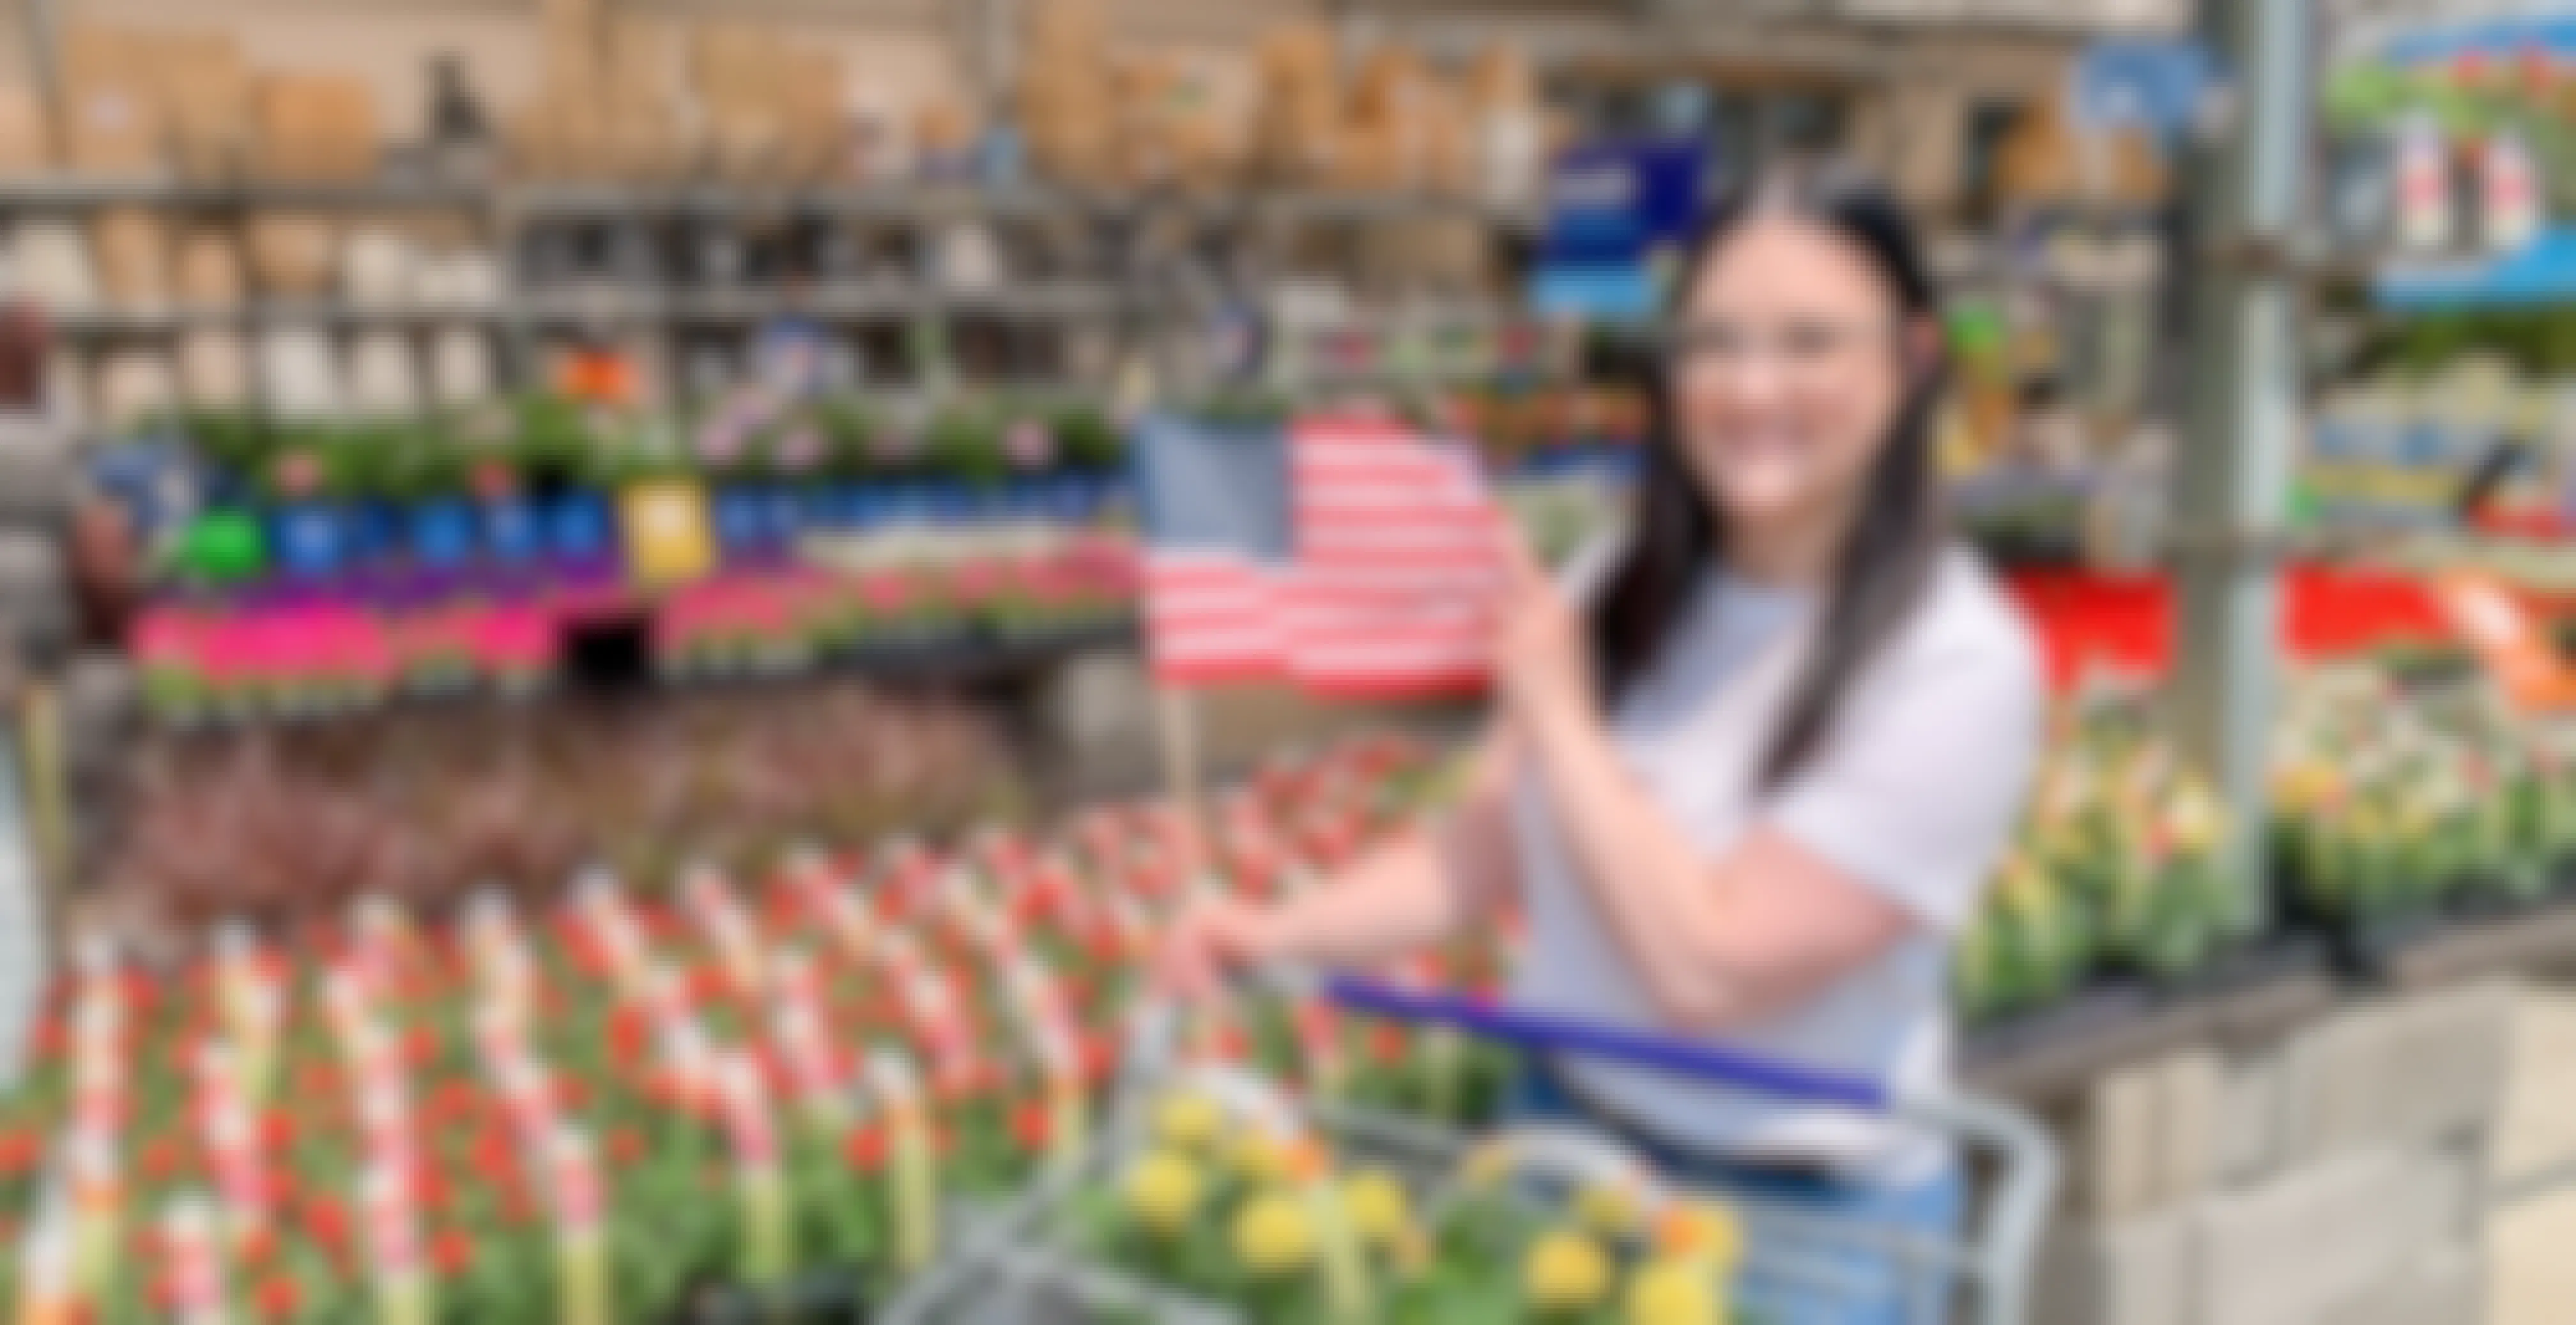 Lowe's Memorial Day Sale: How to Land the Best Deals